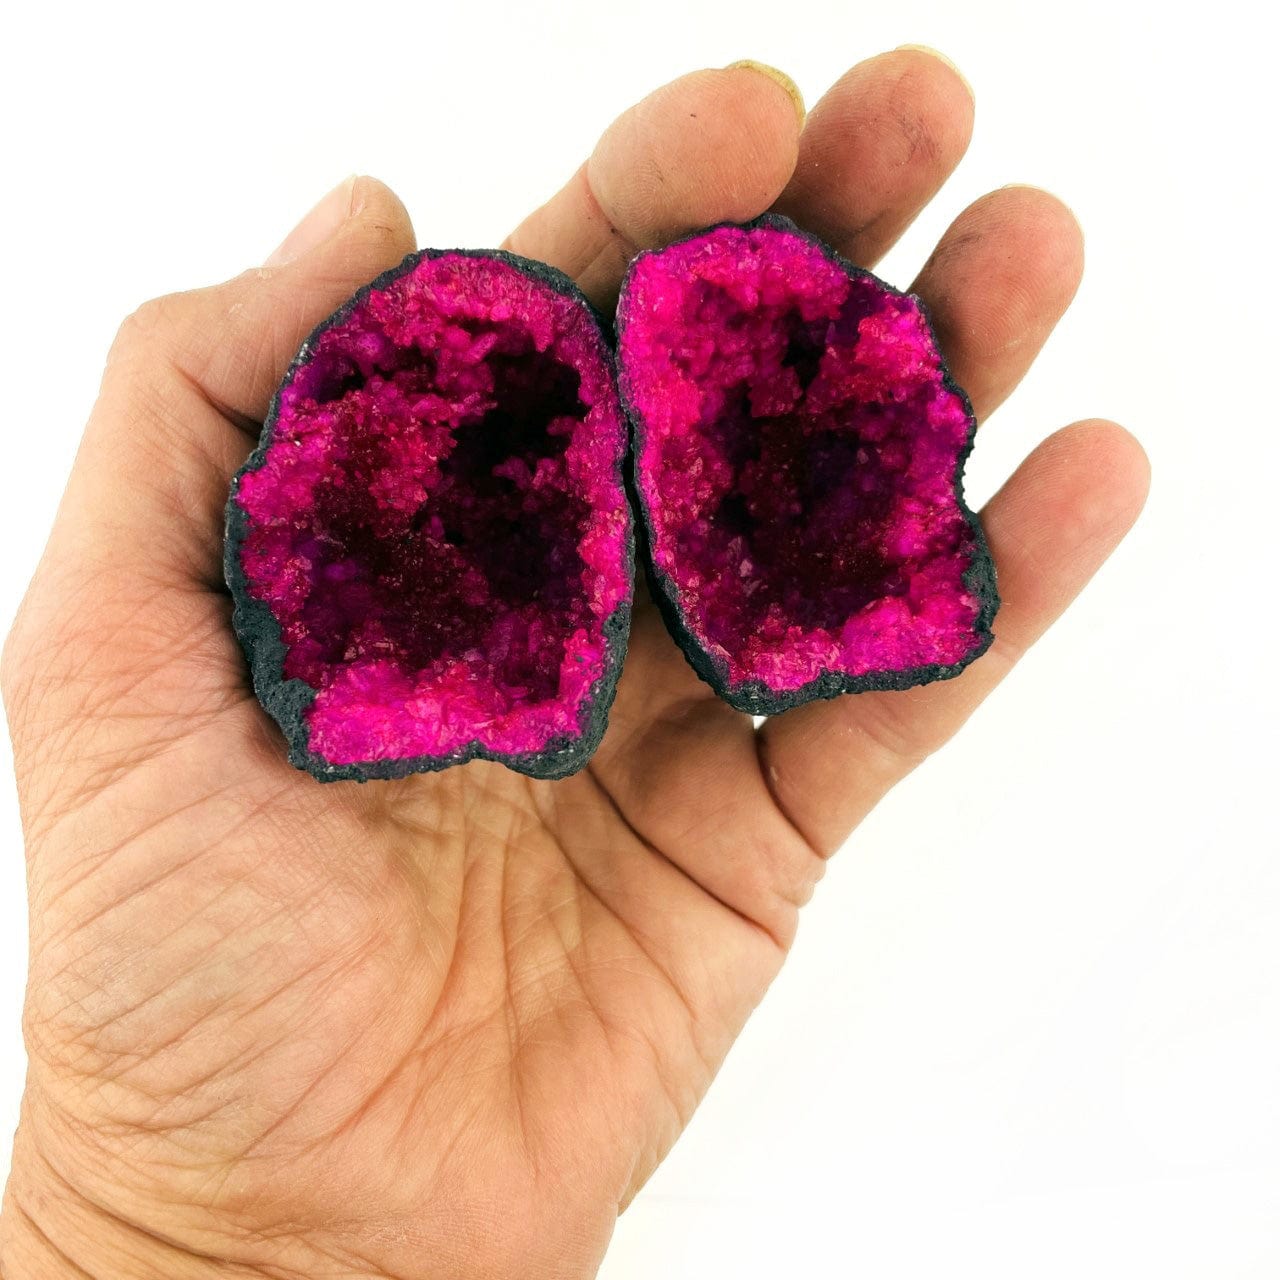 Hot Pink Color Dyed opened Geode in a hand